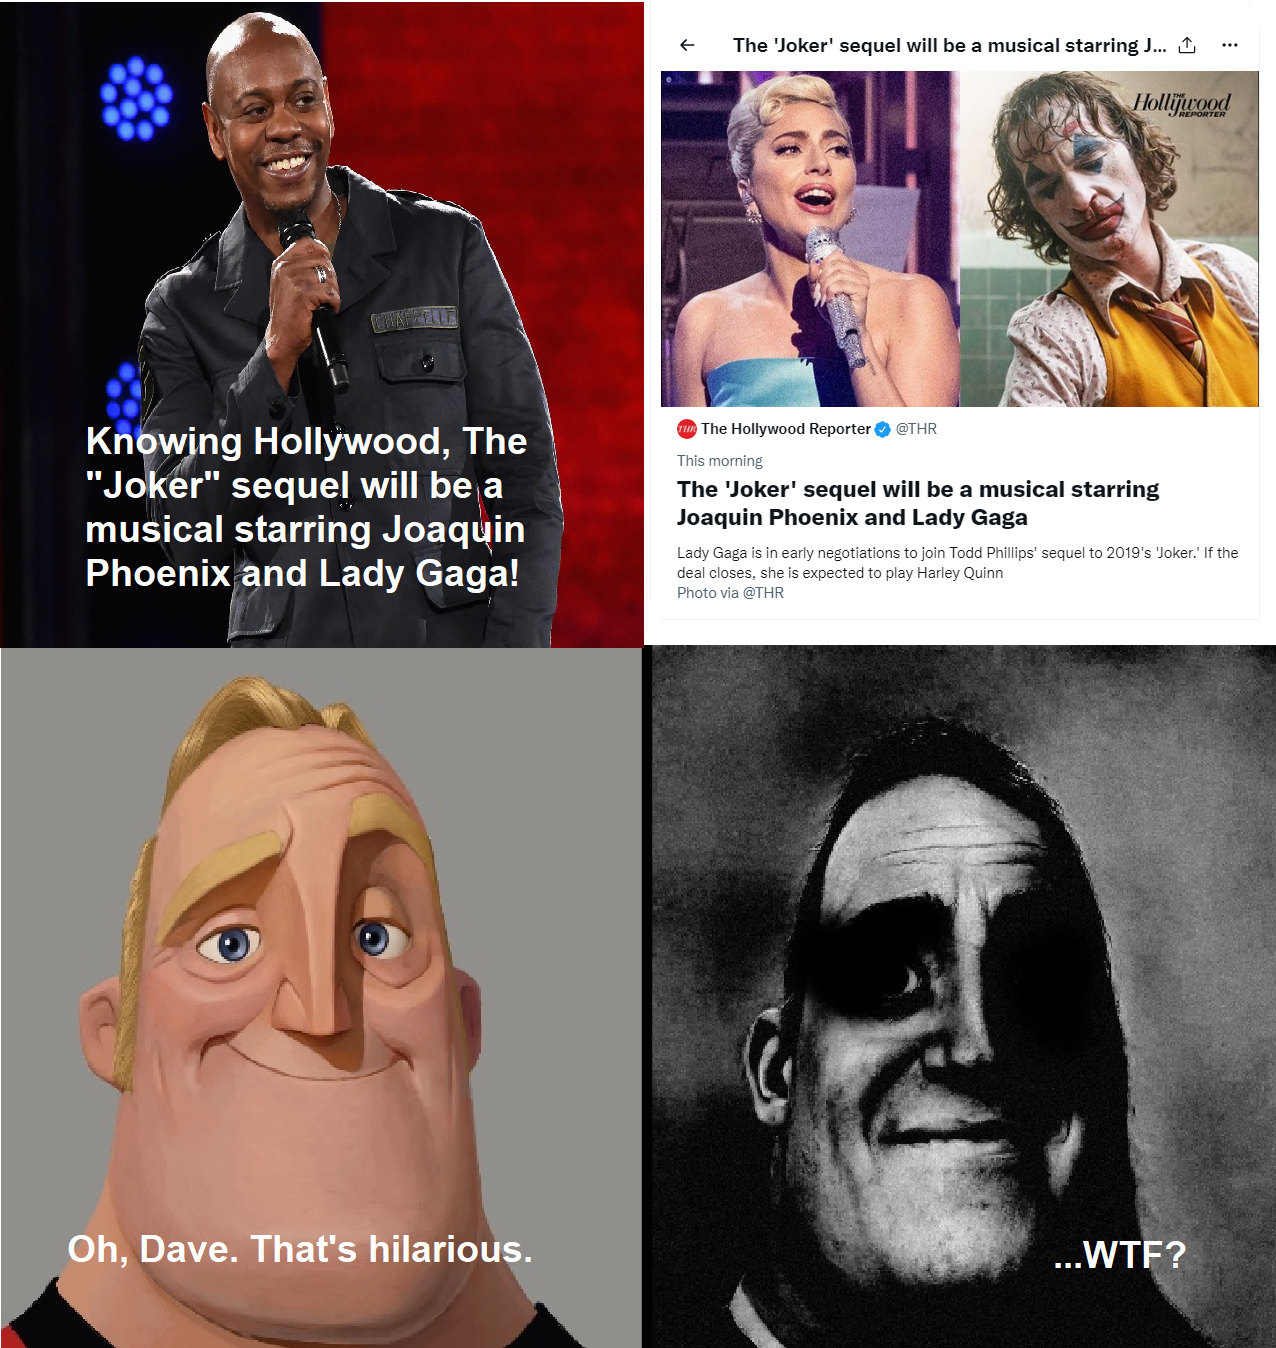 dank memes - clash royale inferno dragon meme - Knowing Hollywood, The "Joker" sequel will be a musical starring Joaquin Phoenix and Lady Gaga! Oh, Dave. That's hilarious. The Joker' sequel will be a musical starring J....... Hollipoond The Hollywood Repo